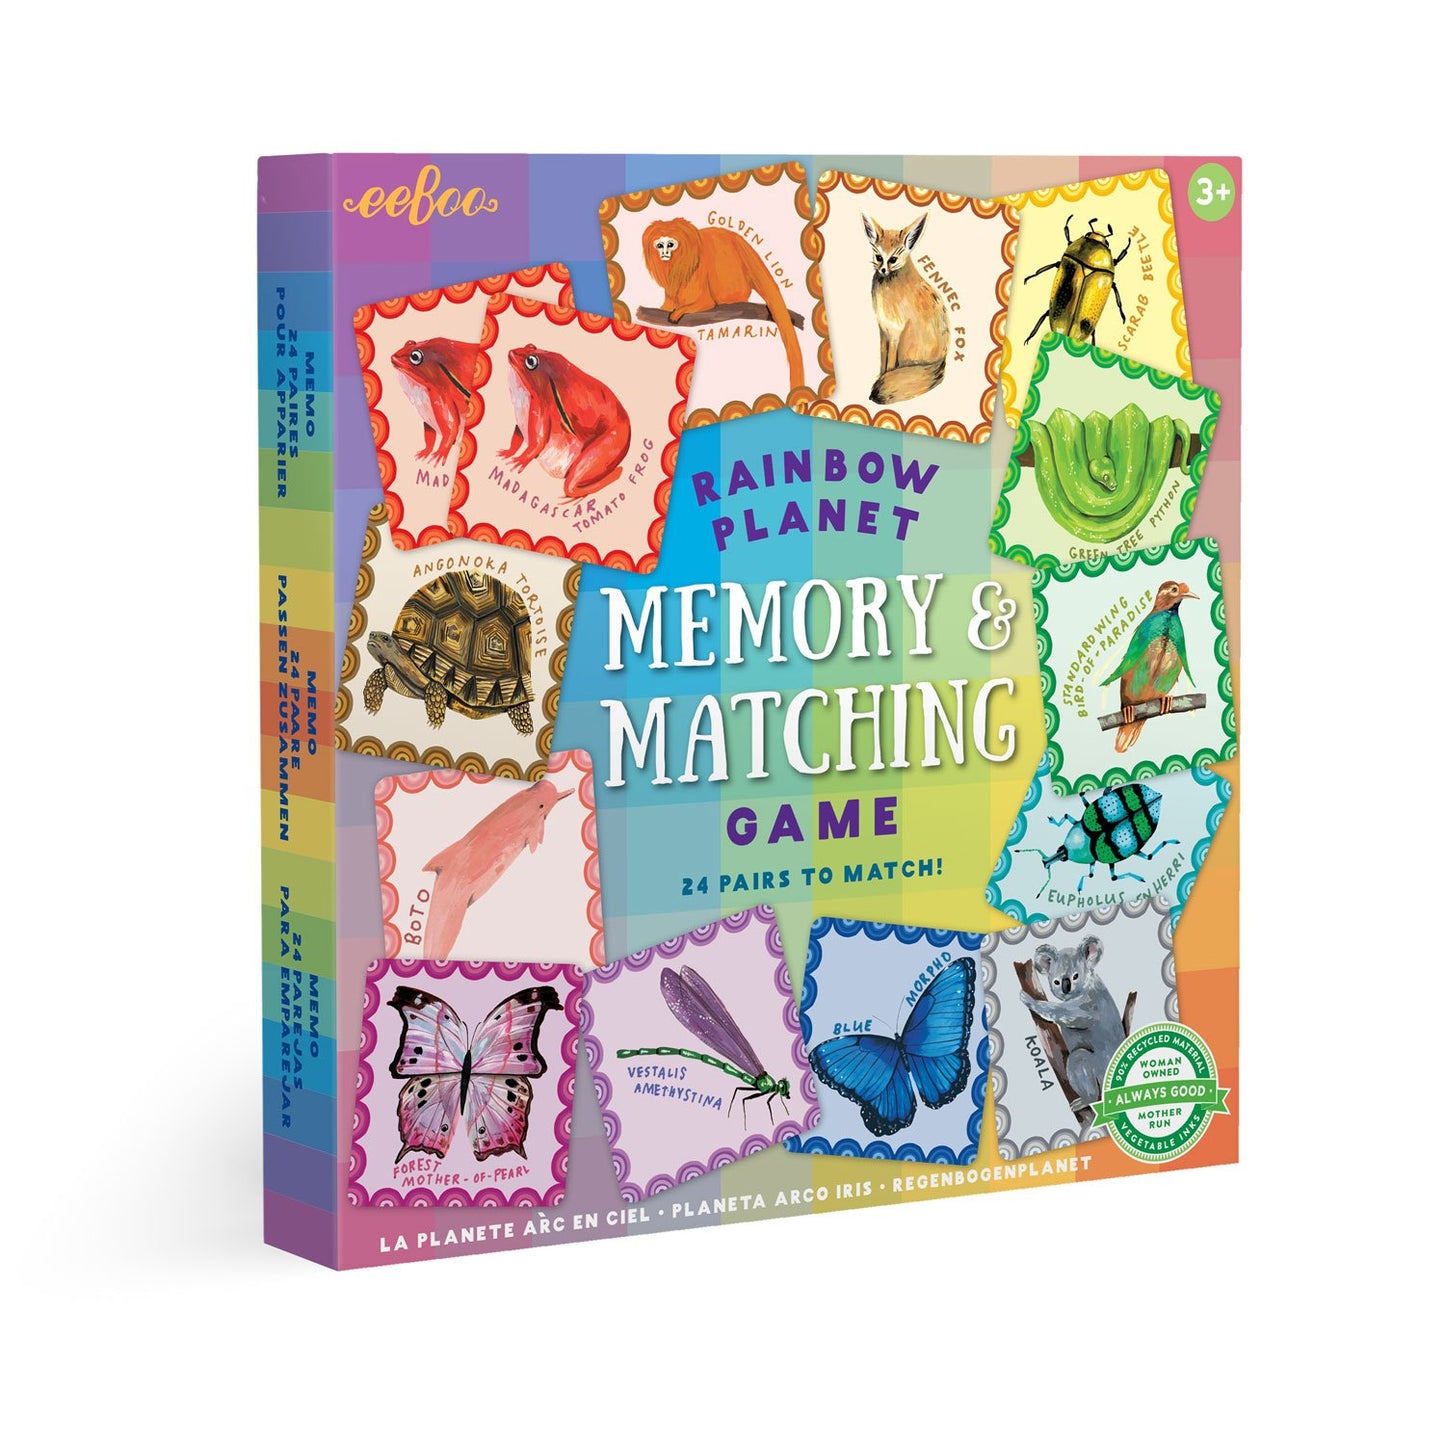 Eeboo Rainbow Planet Memory and Matching Game